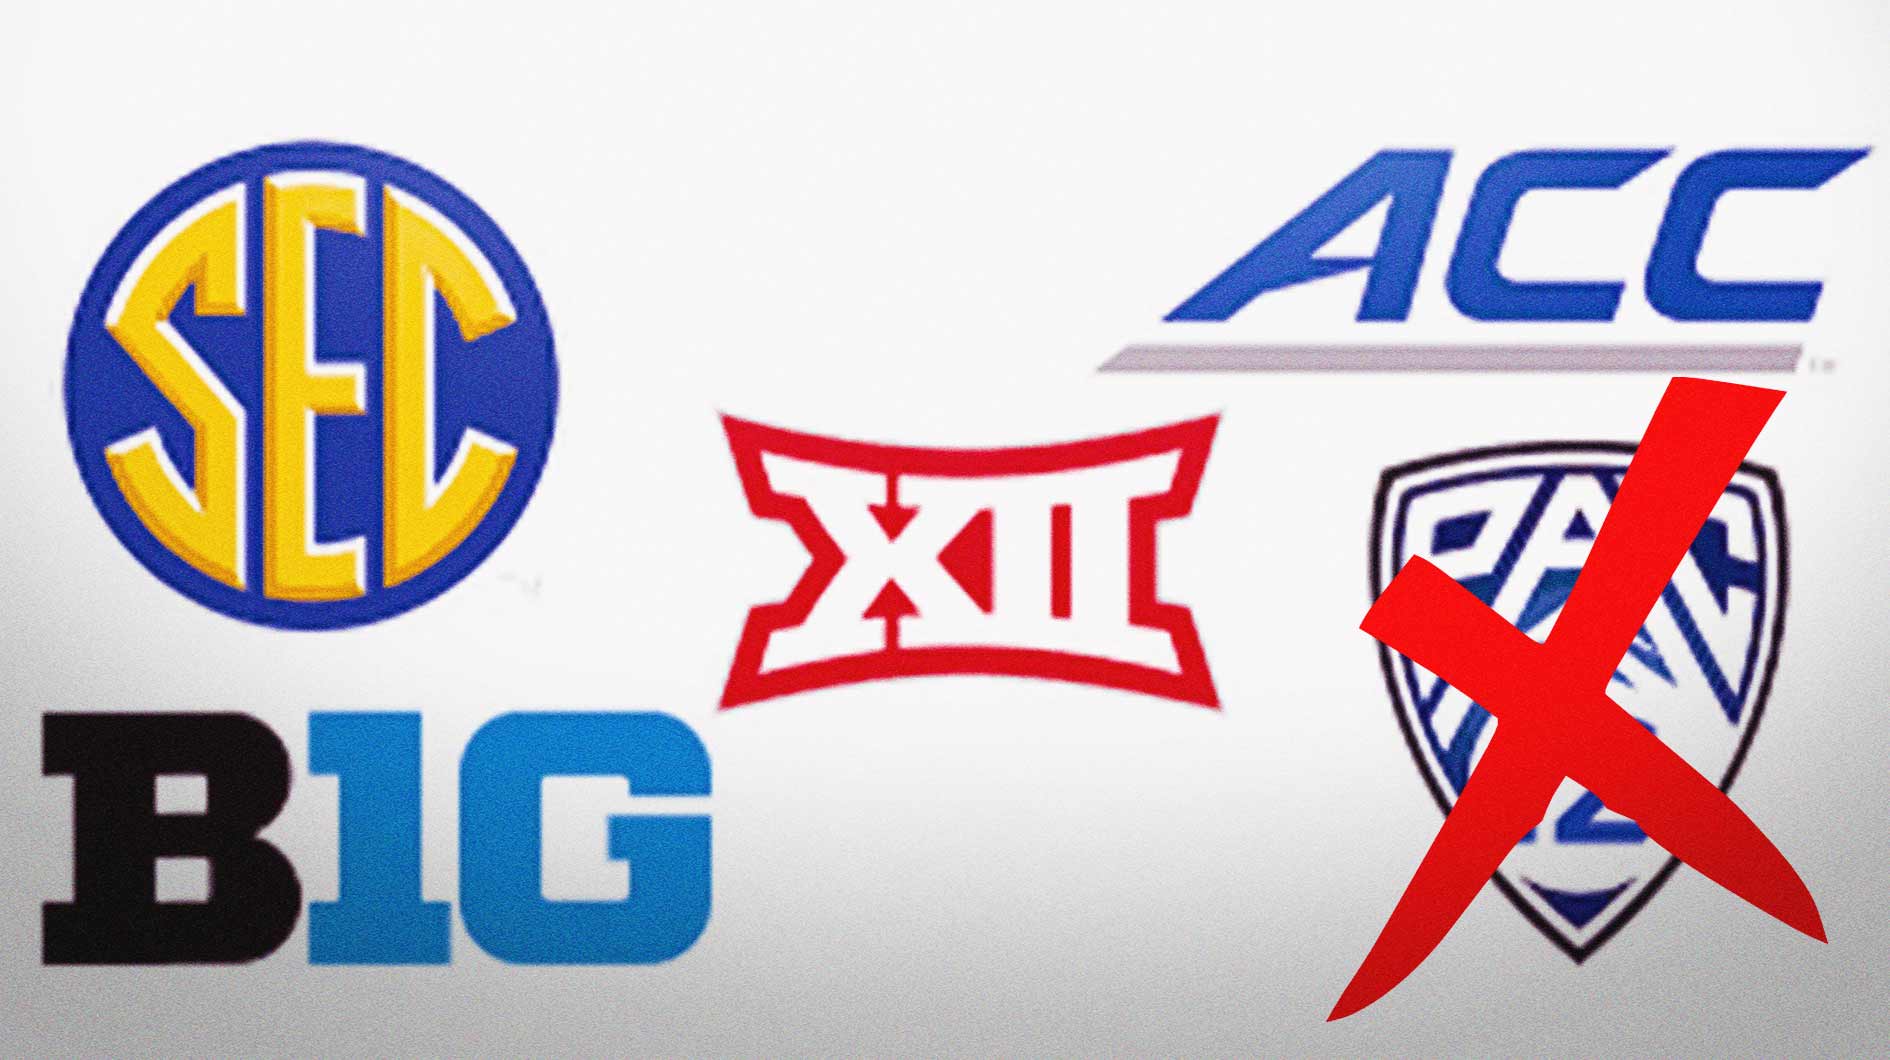 Power-5 conferences, with Pac-12 x'ed out. ACC next?